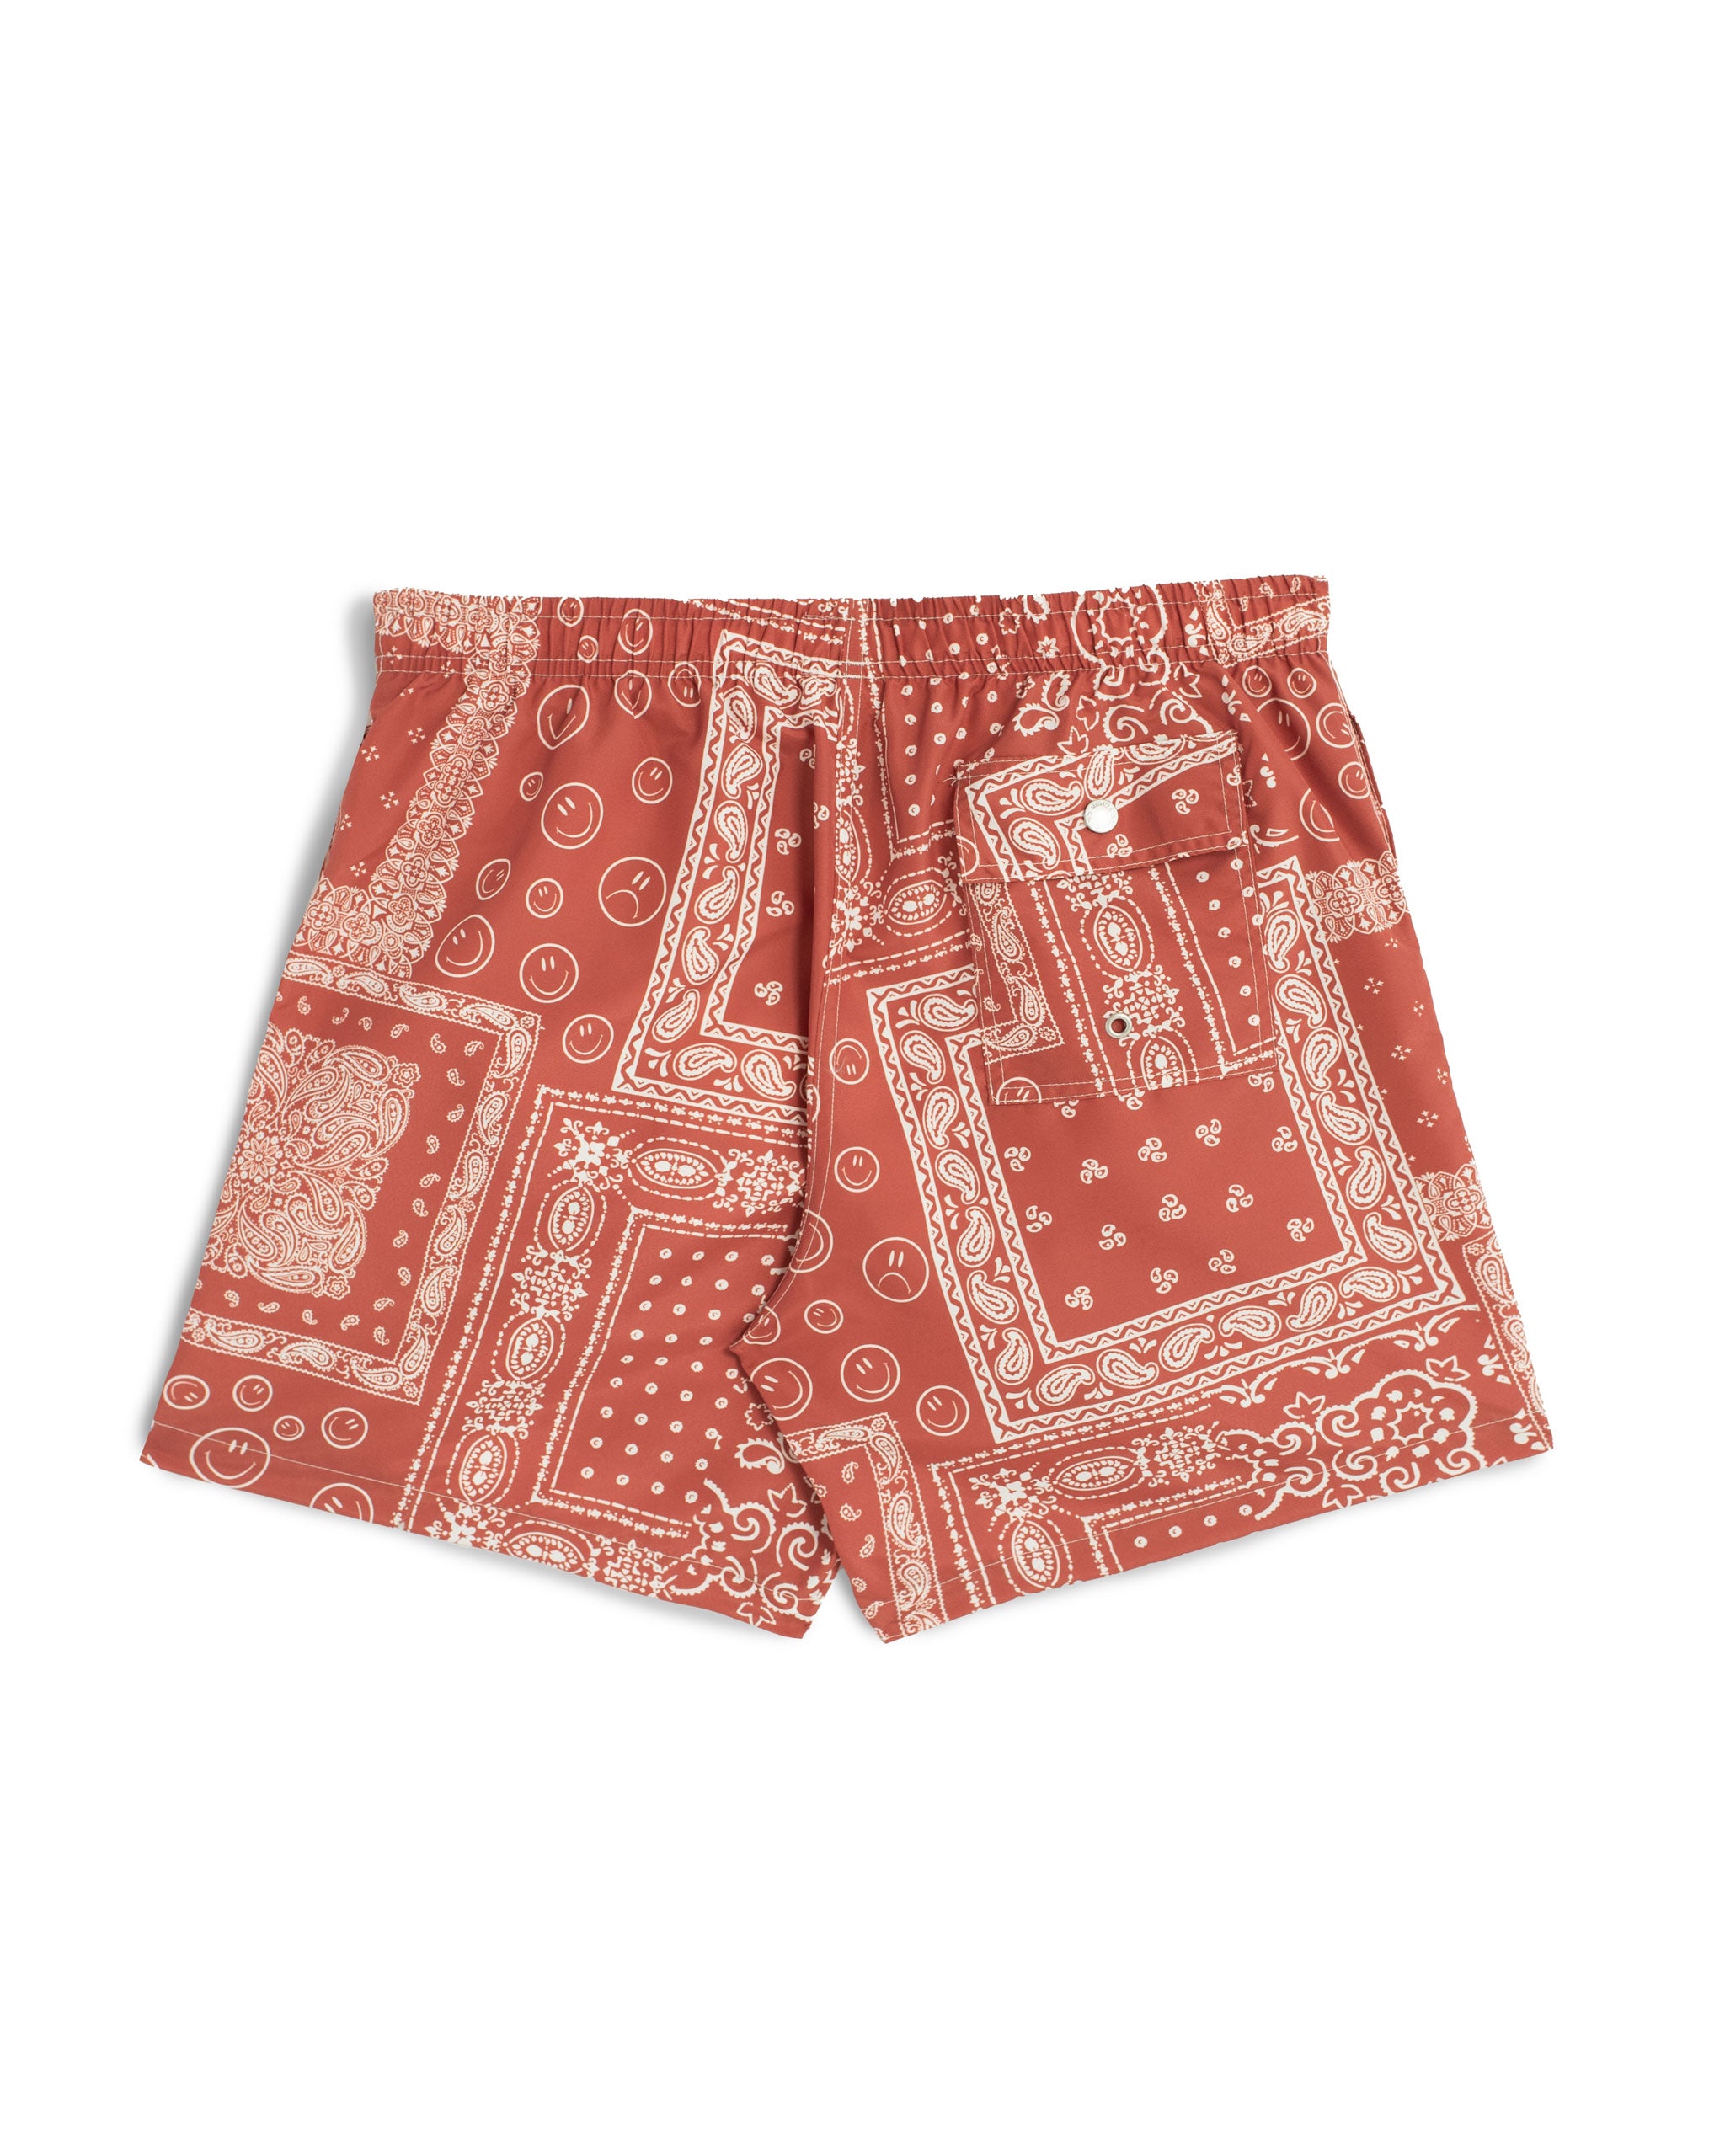 back shot of A terracotta red swim trunk with an all-over bandana print